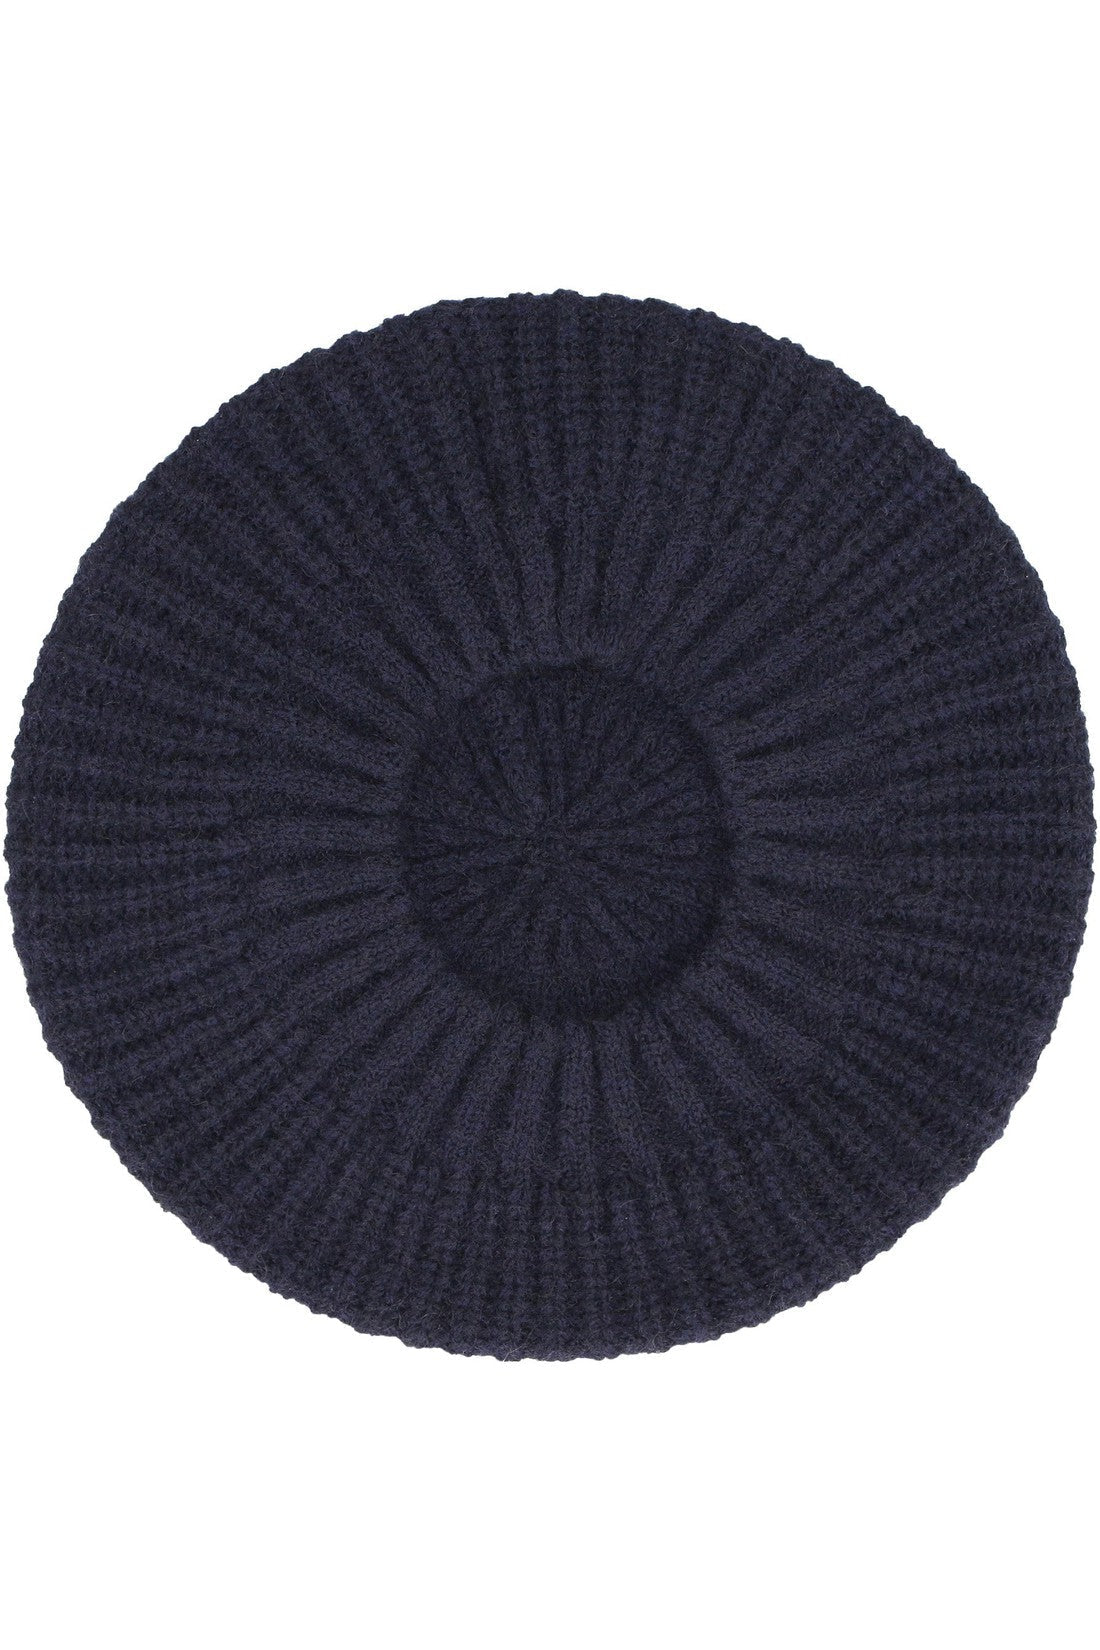 Roberto Collina-OUTLET-SALE-Wool beret-ARCHIVIST